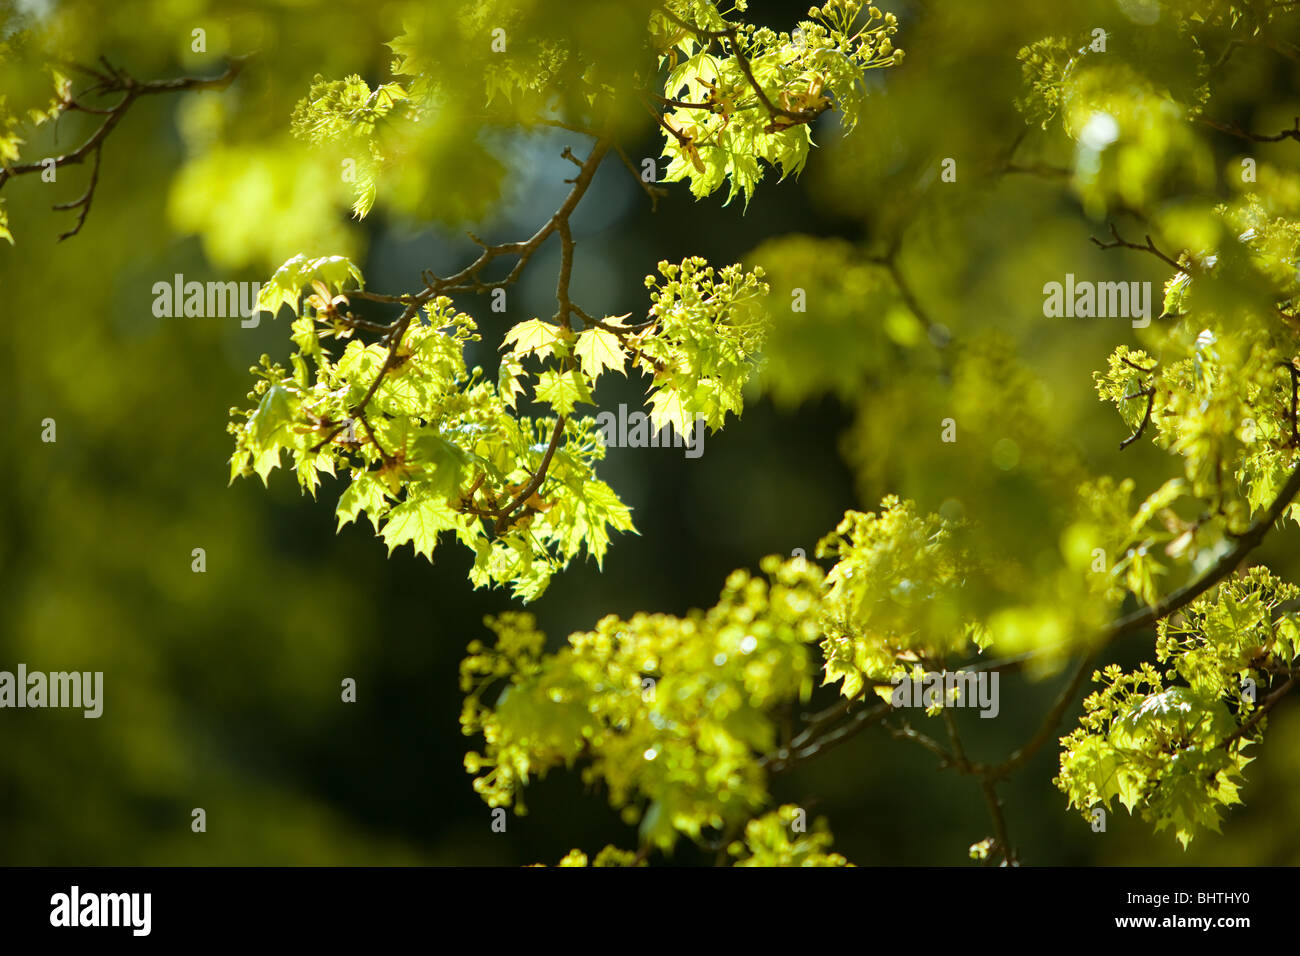 Norway Maple, Acer platanoides, blossom Banque D'Images